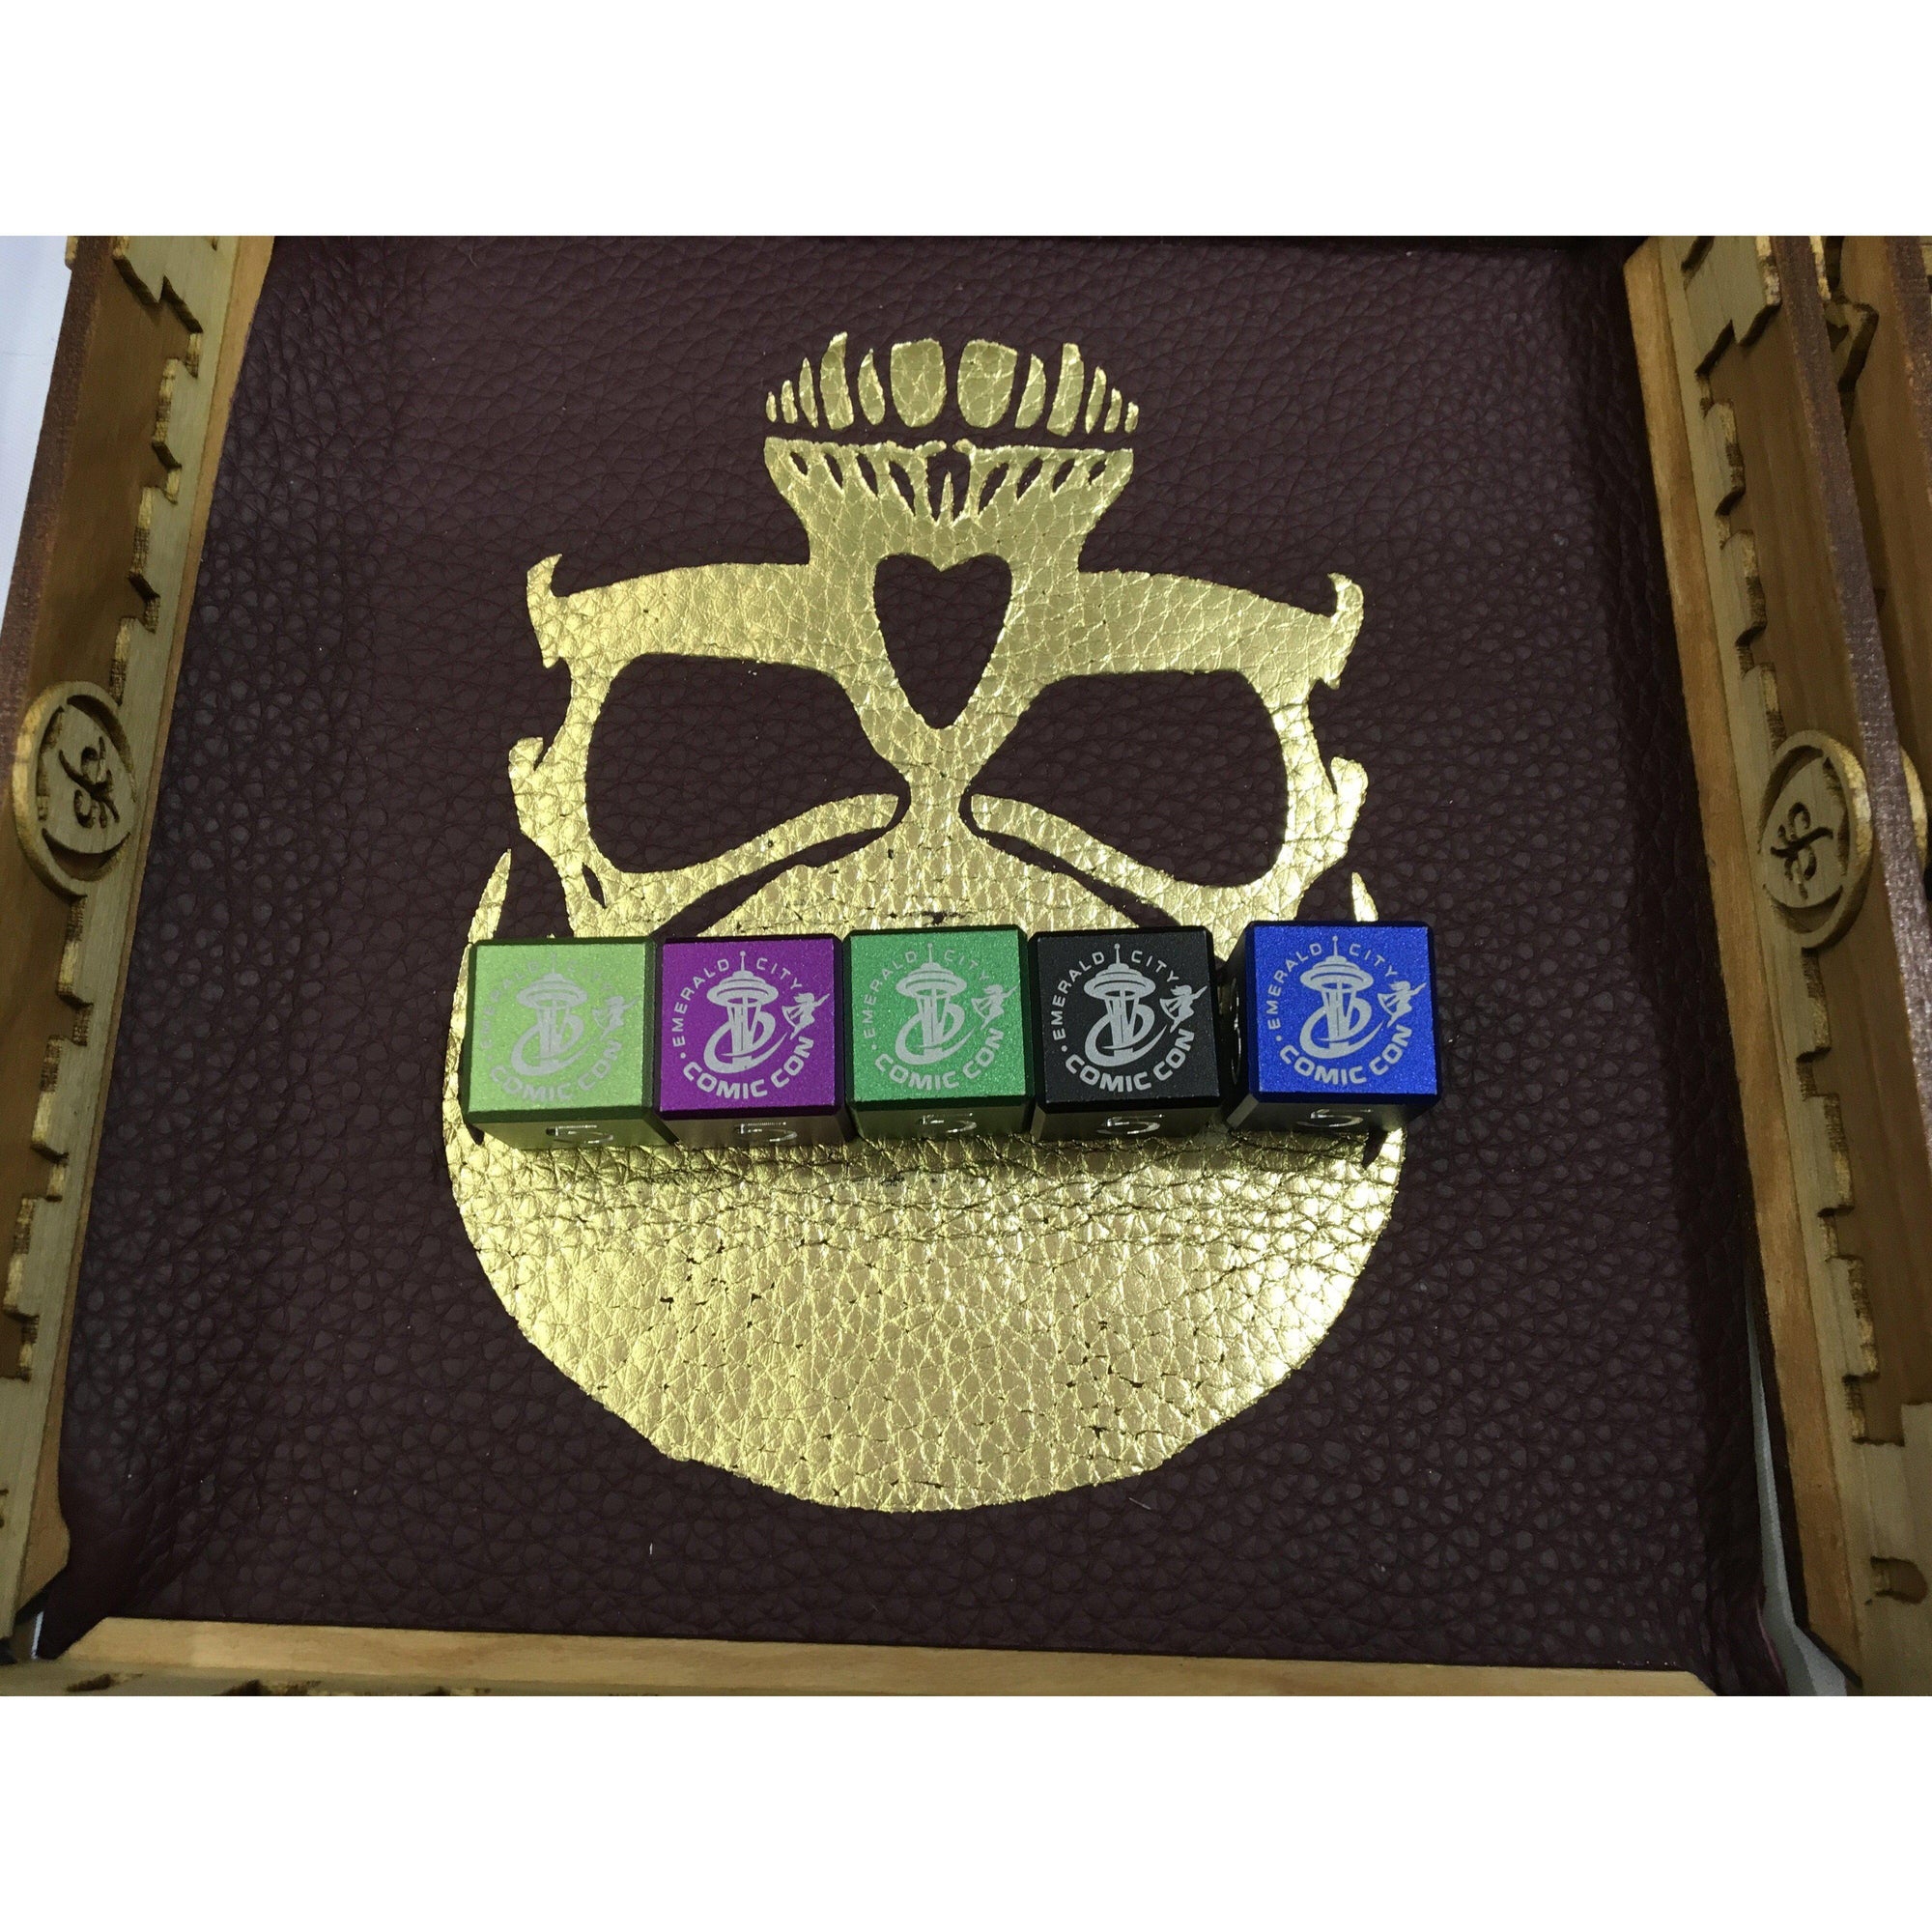 Emerald City Comic Con Dice-Norse Foundry-DND Dice-Polyhedral Dice-D20-Metal Dice-Precision Dice-Luxury Dice-Dungeons and Dragons-D&D-